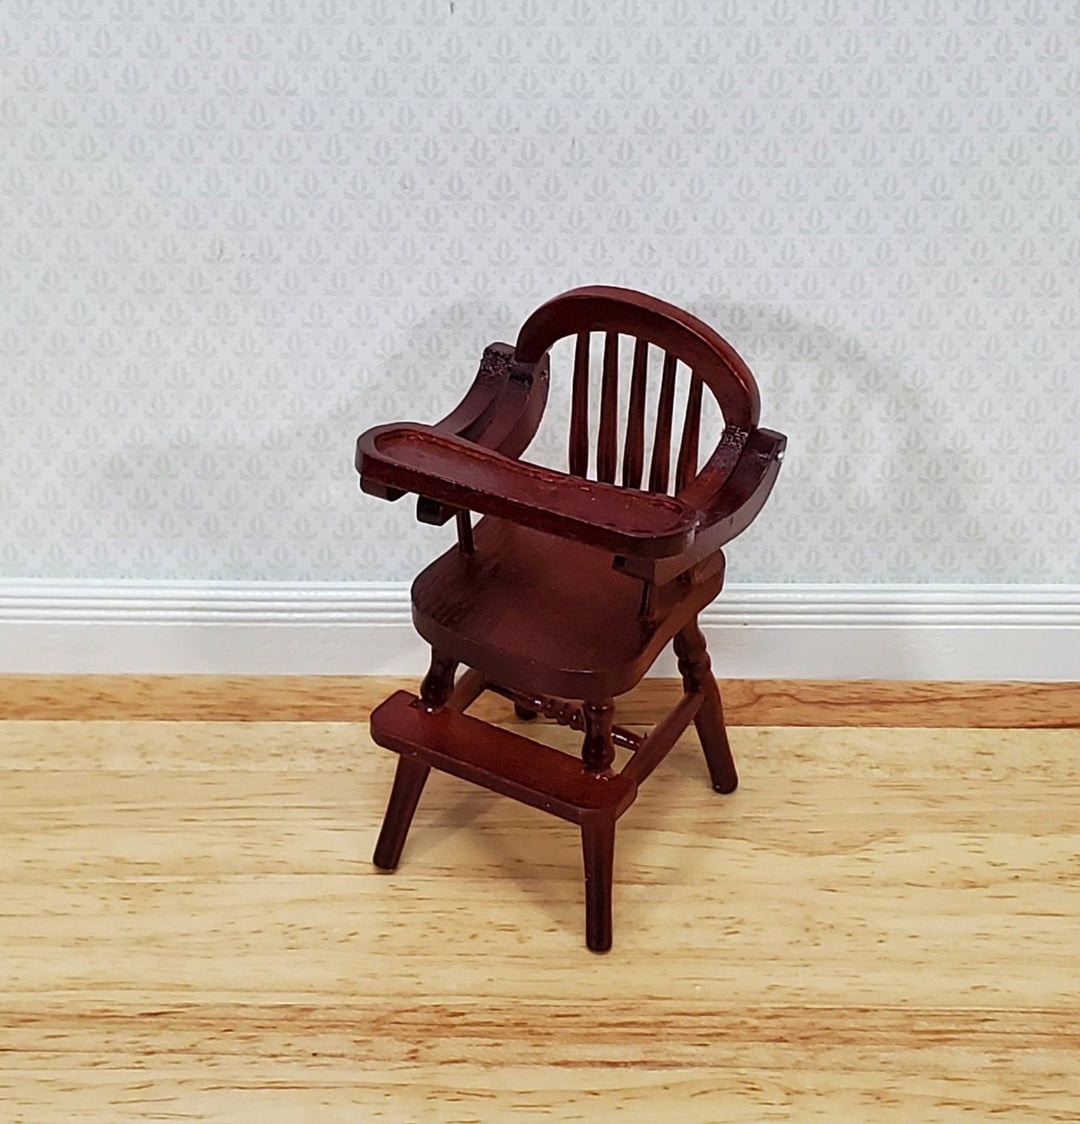 Dollhouse High Chair 1:12 Scale Miniature Furniture Wood Mahogany Finish Movable Tray - Miniature Crush